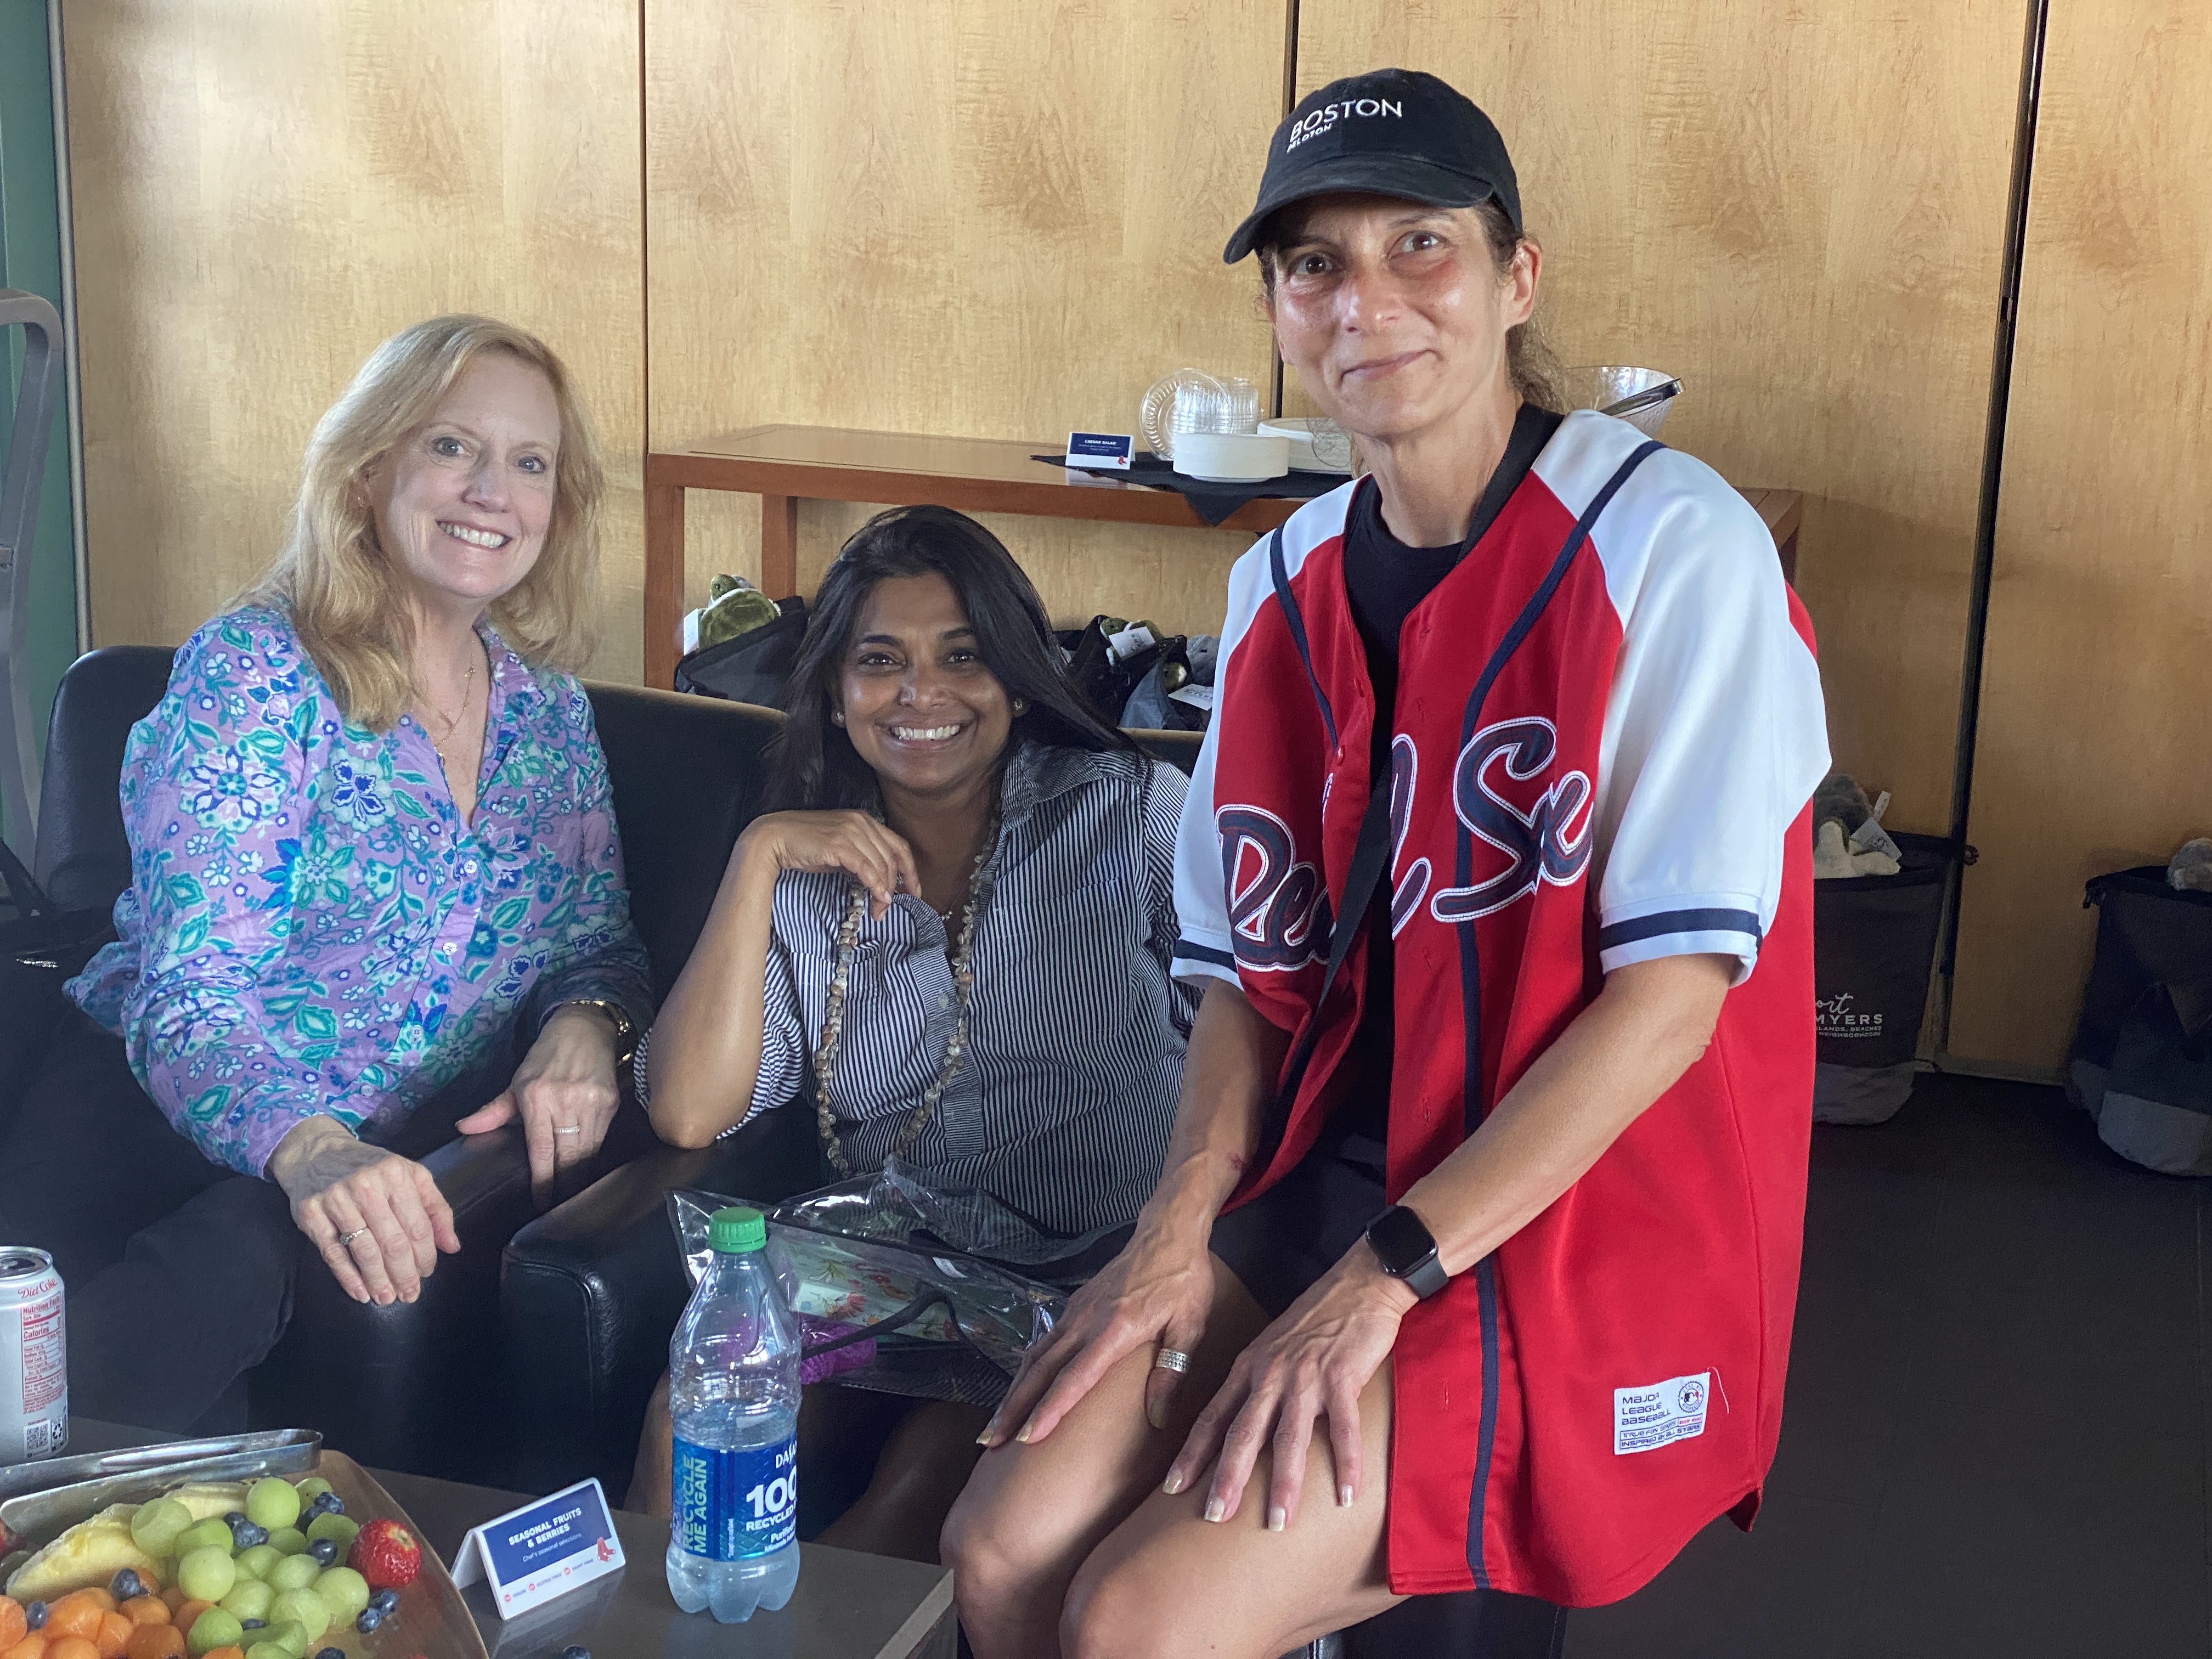 A day at Fenway!  Joining Betsy Bush (left - right) are Amrita Nicols, ConferenceDirect; and Mary Ellen Yeager, International Gaming Technology